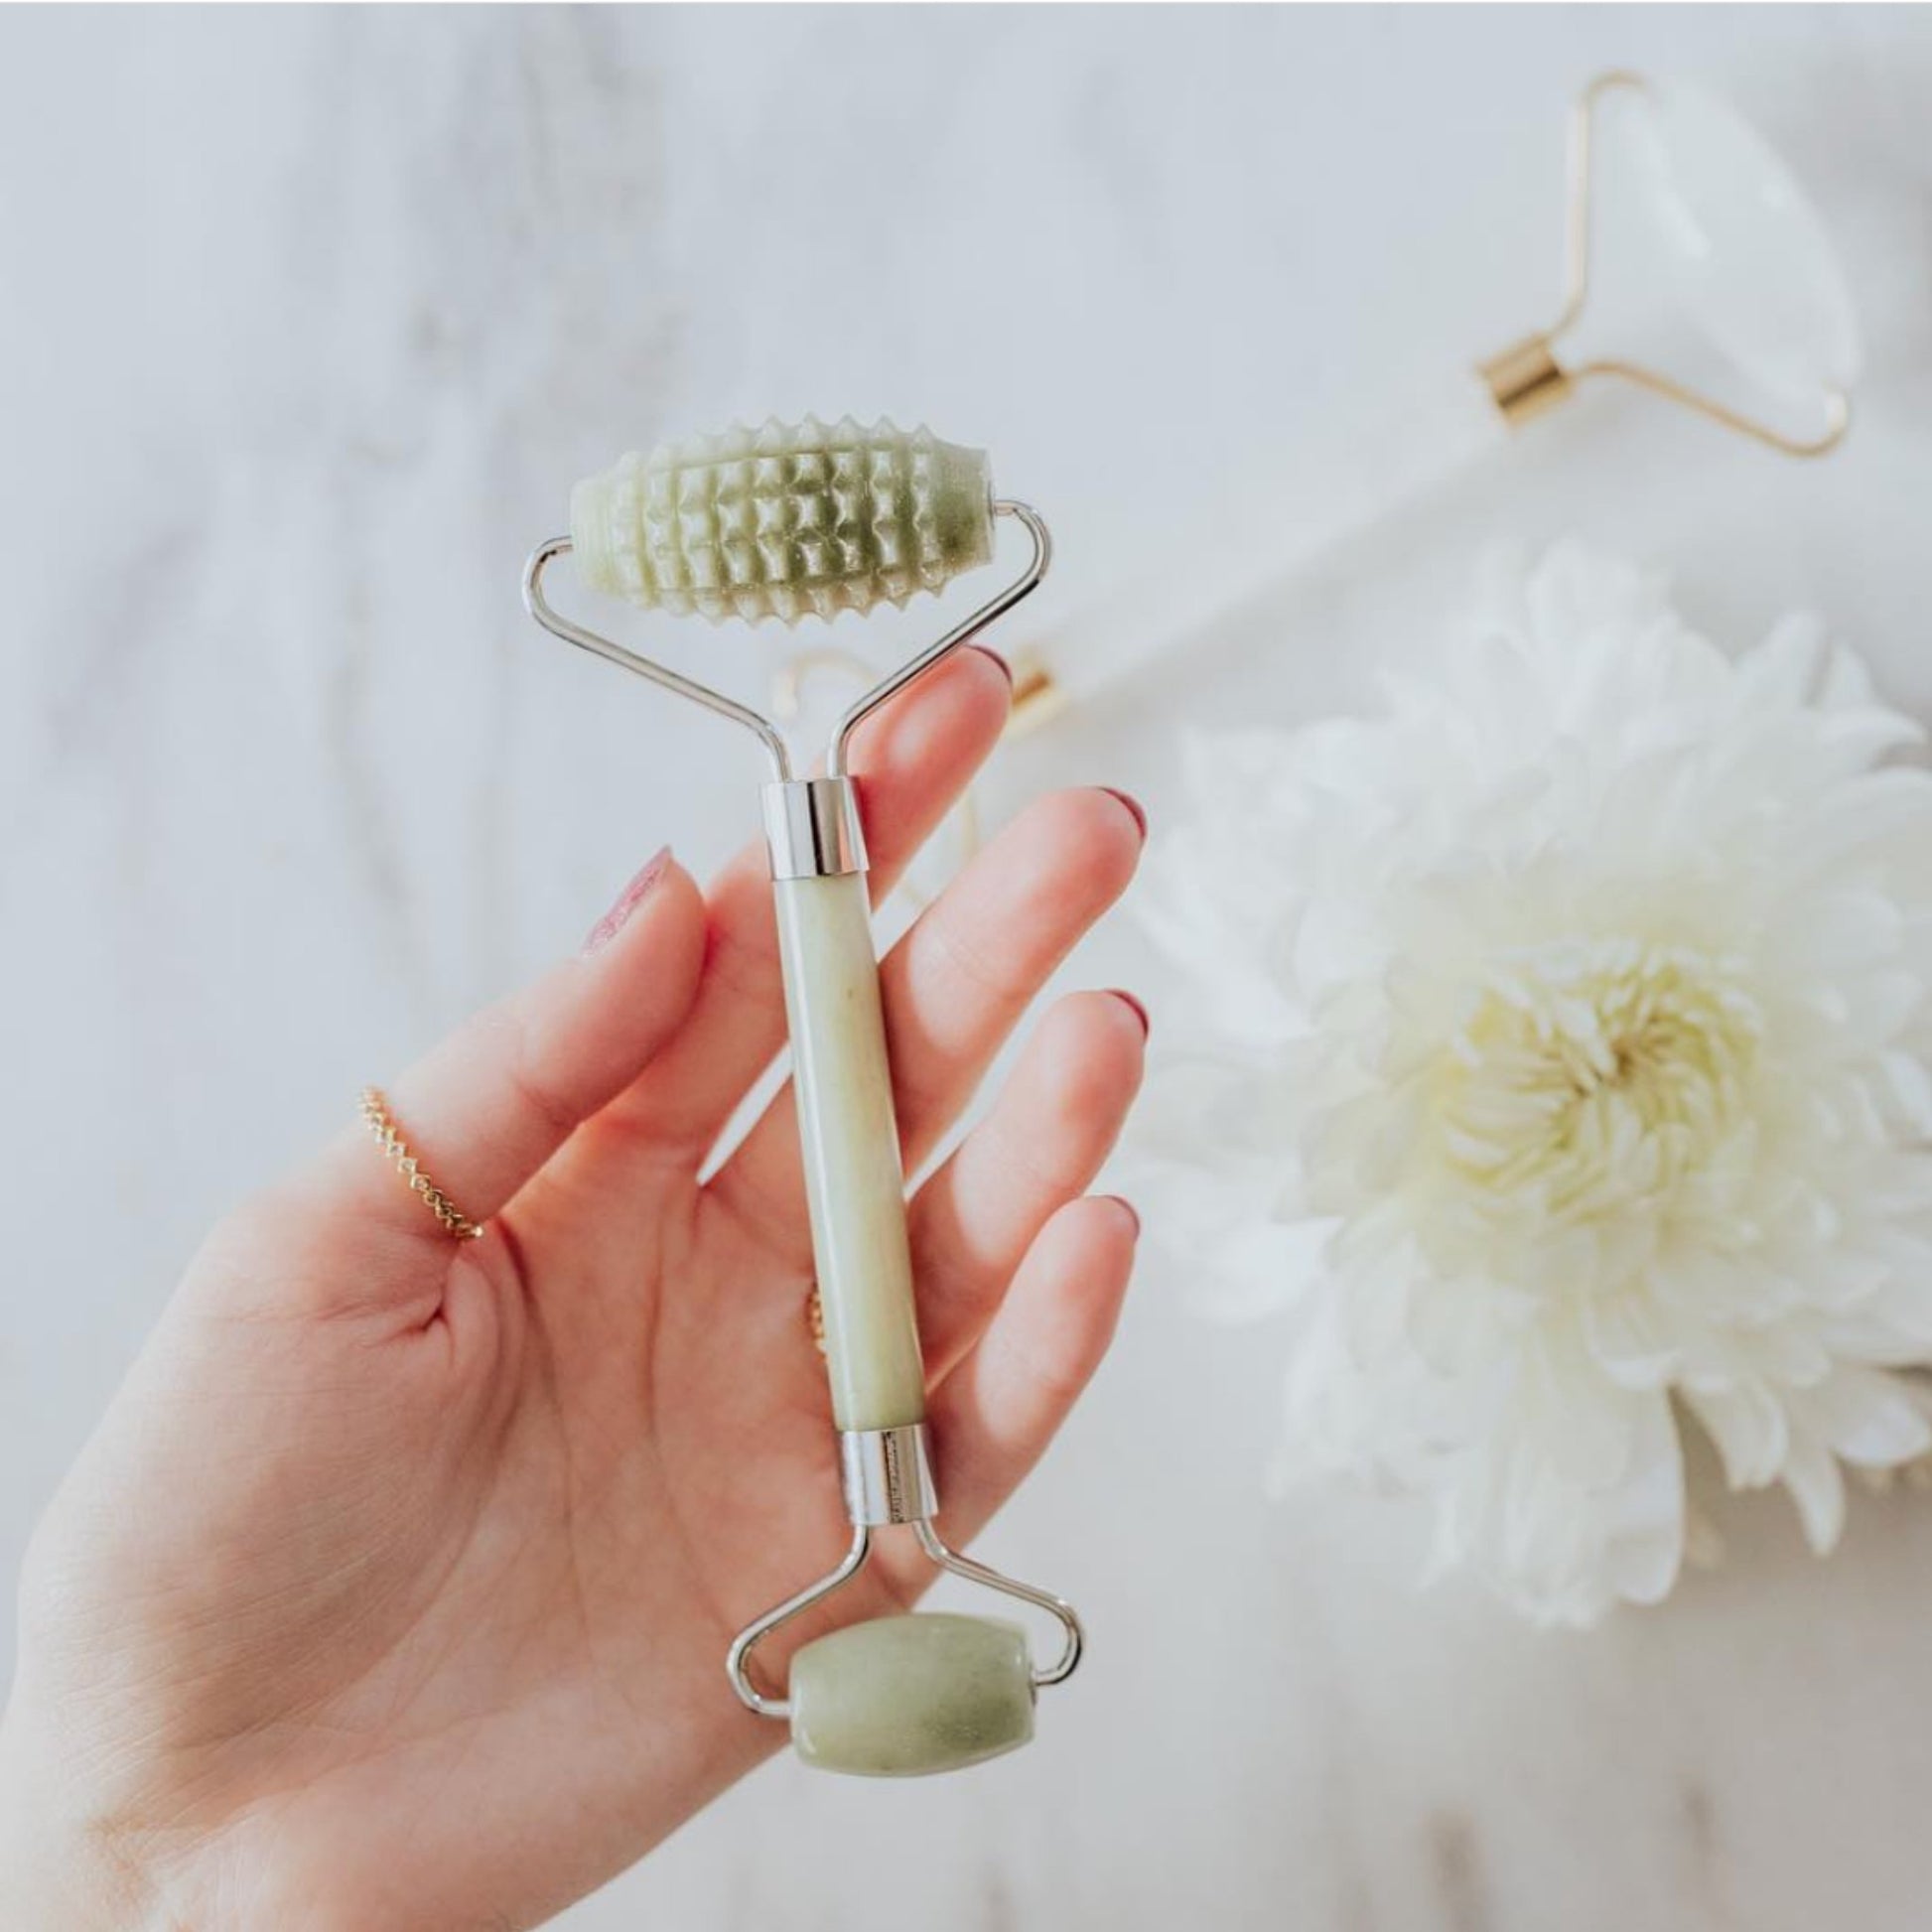 Cleres - Facial Roller - ORESTA clean beauty simplified